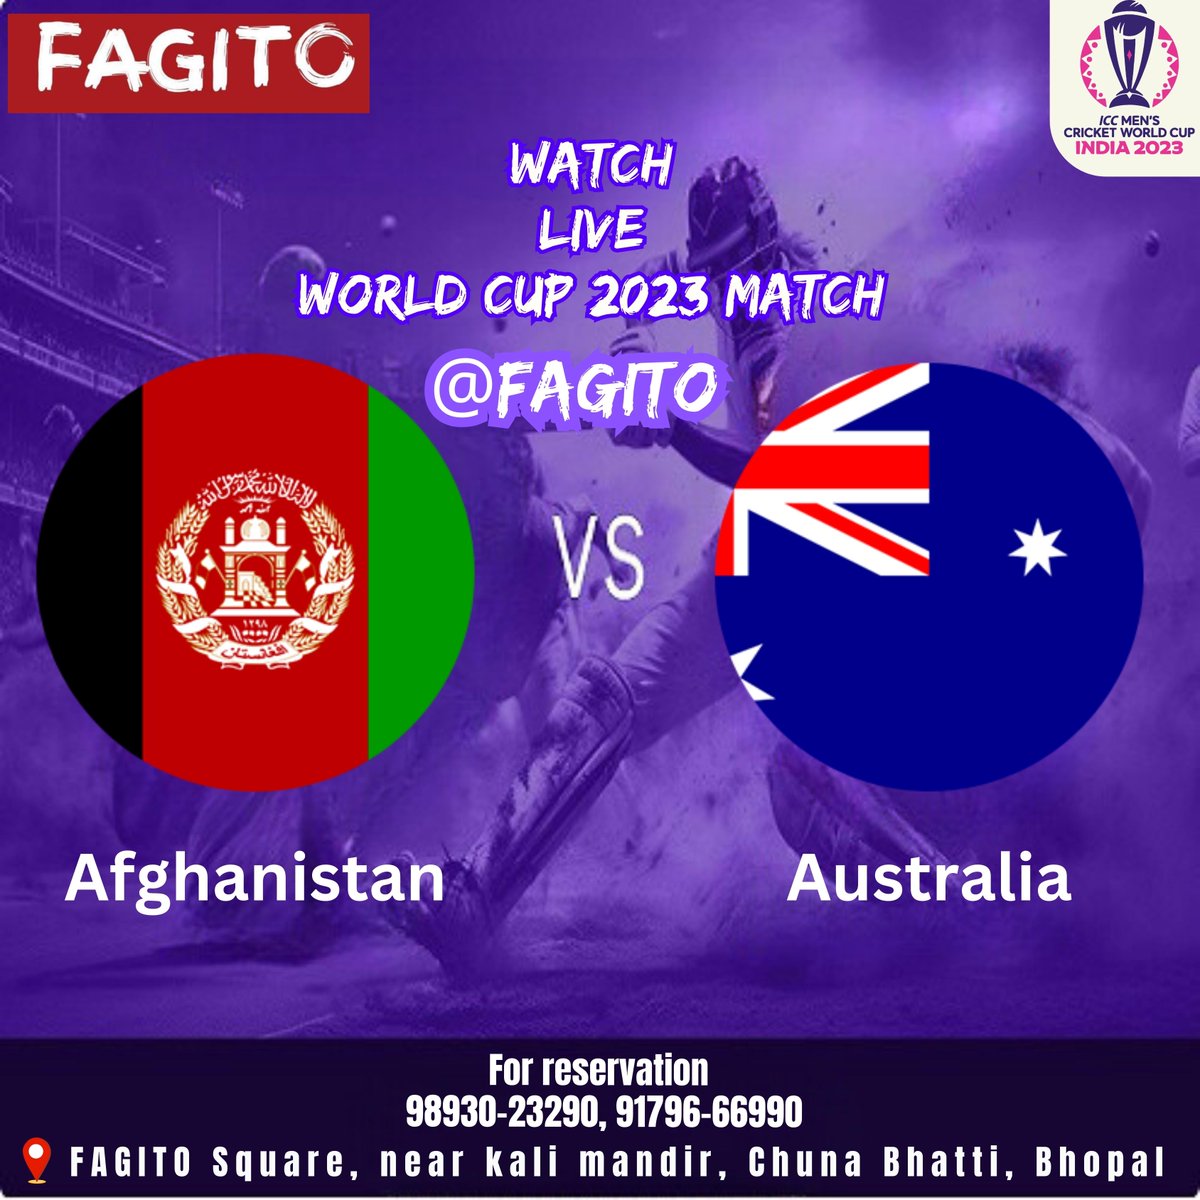 Fagito restaurant invites you to join us for an exciting World Cup 2023 Match between Afghanistan and Australia. We will be streaming the game live on November 7th, starting at 2:00 P.M. Come and enjoy delicious food and drinks with friends and family.

#afghanistanvsaustralia